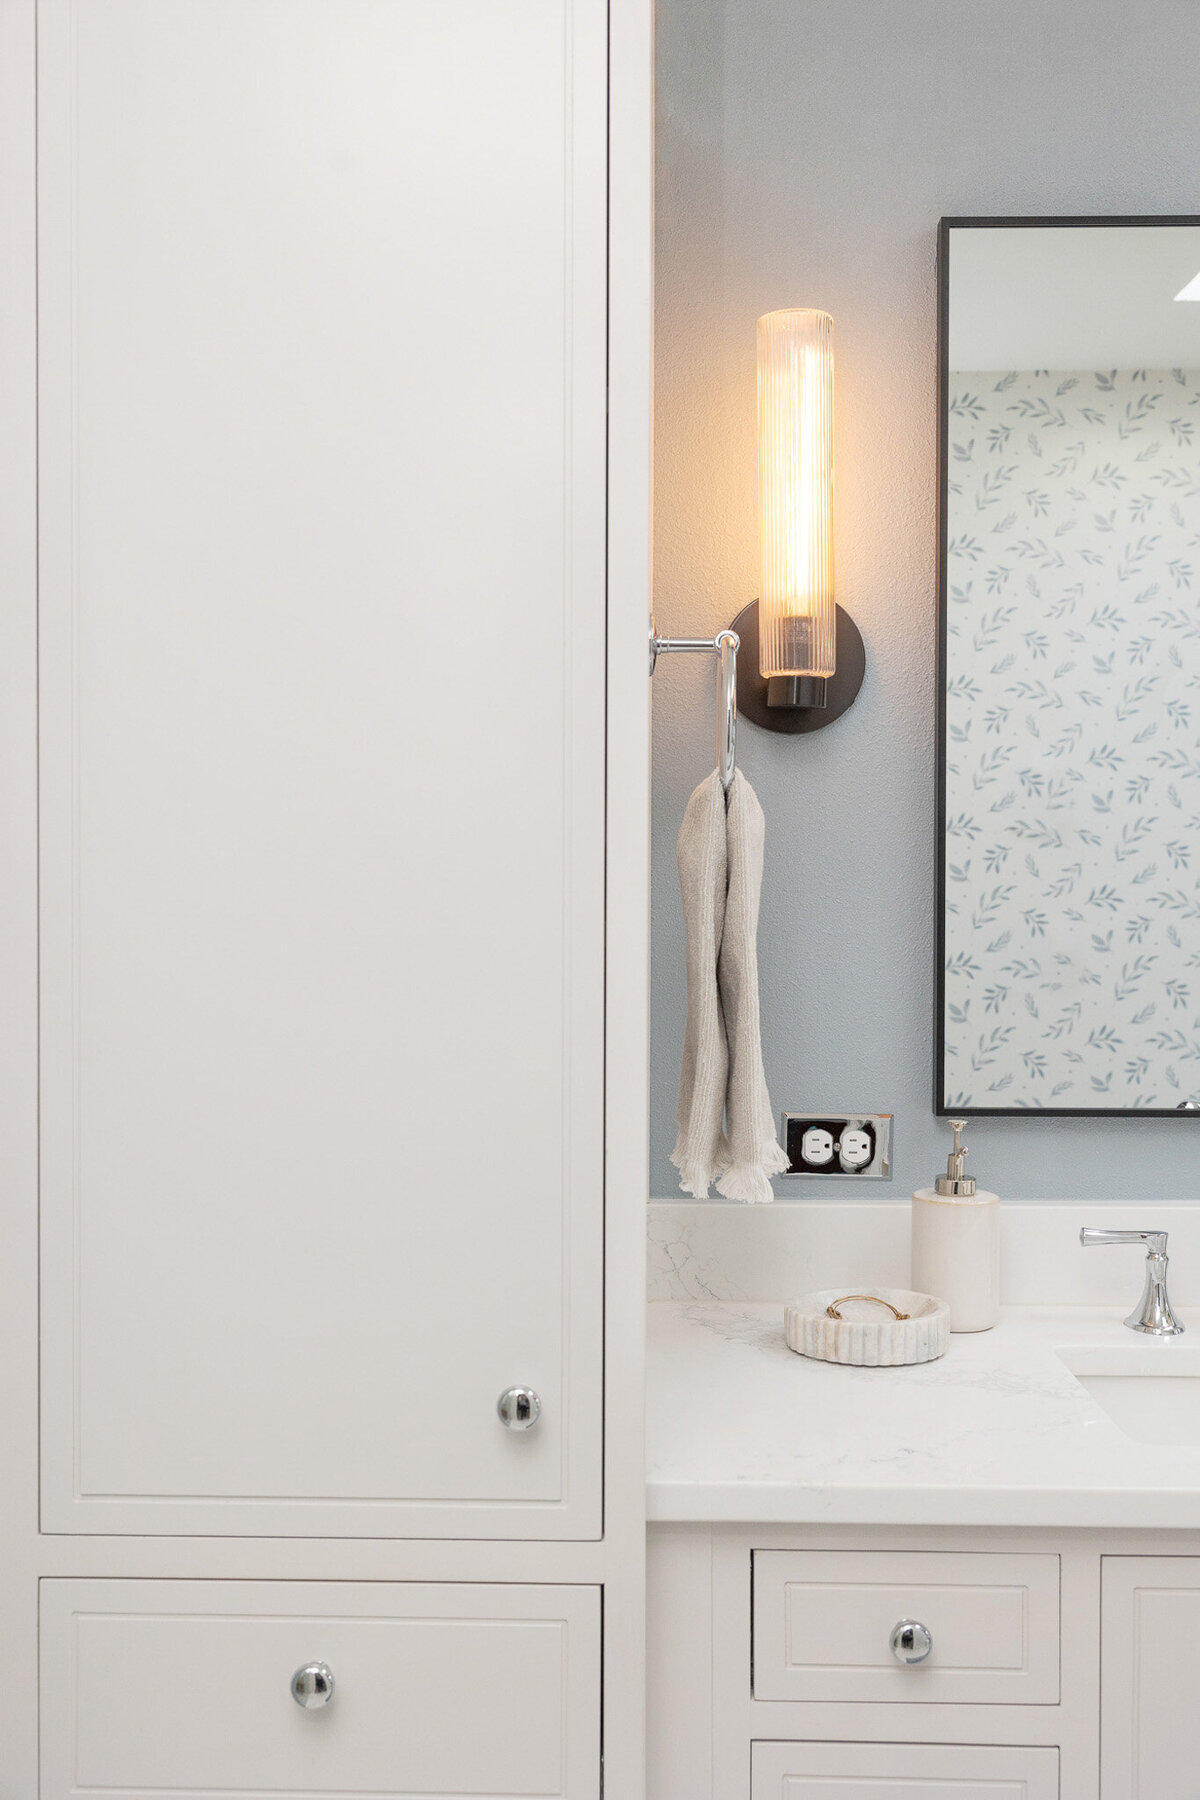 White linen cabinet, white vanity with silver pulls, black mirror and black illuminated sconce, white countertops, blue walls